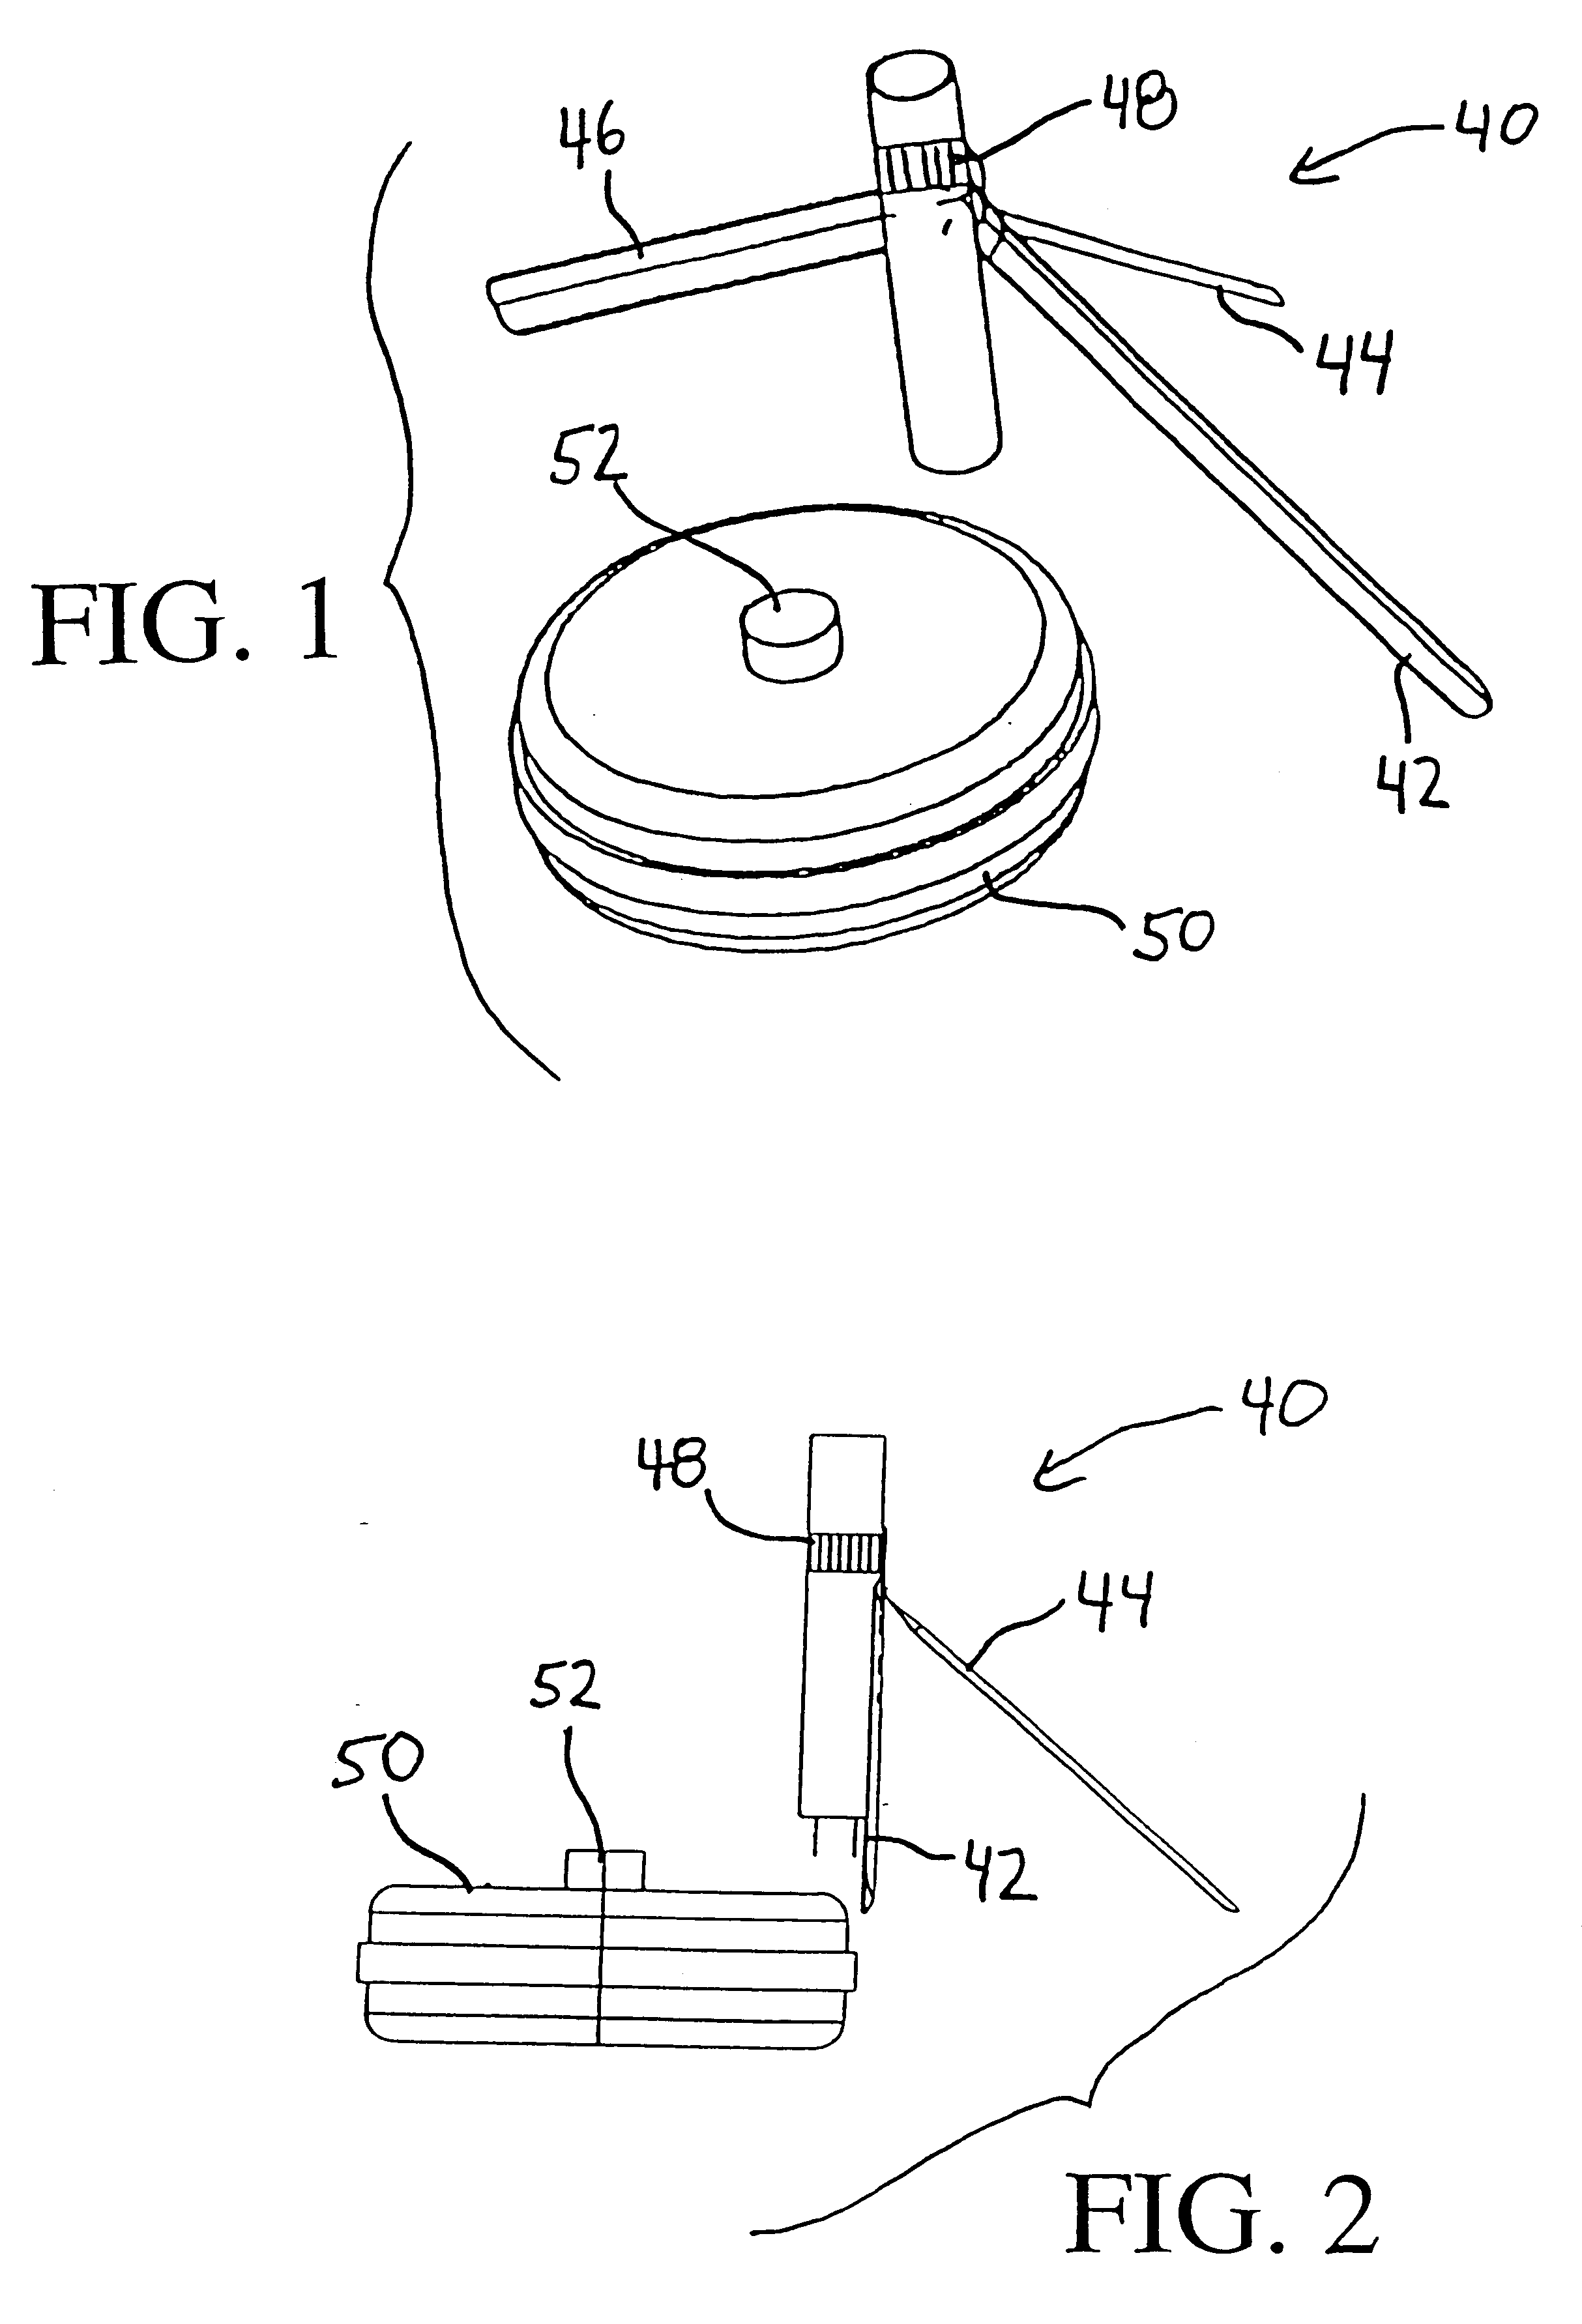 Assembly and process for controlled burning of landmine without detonation